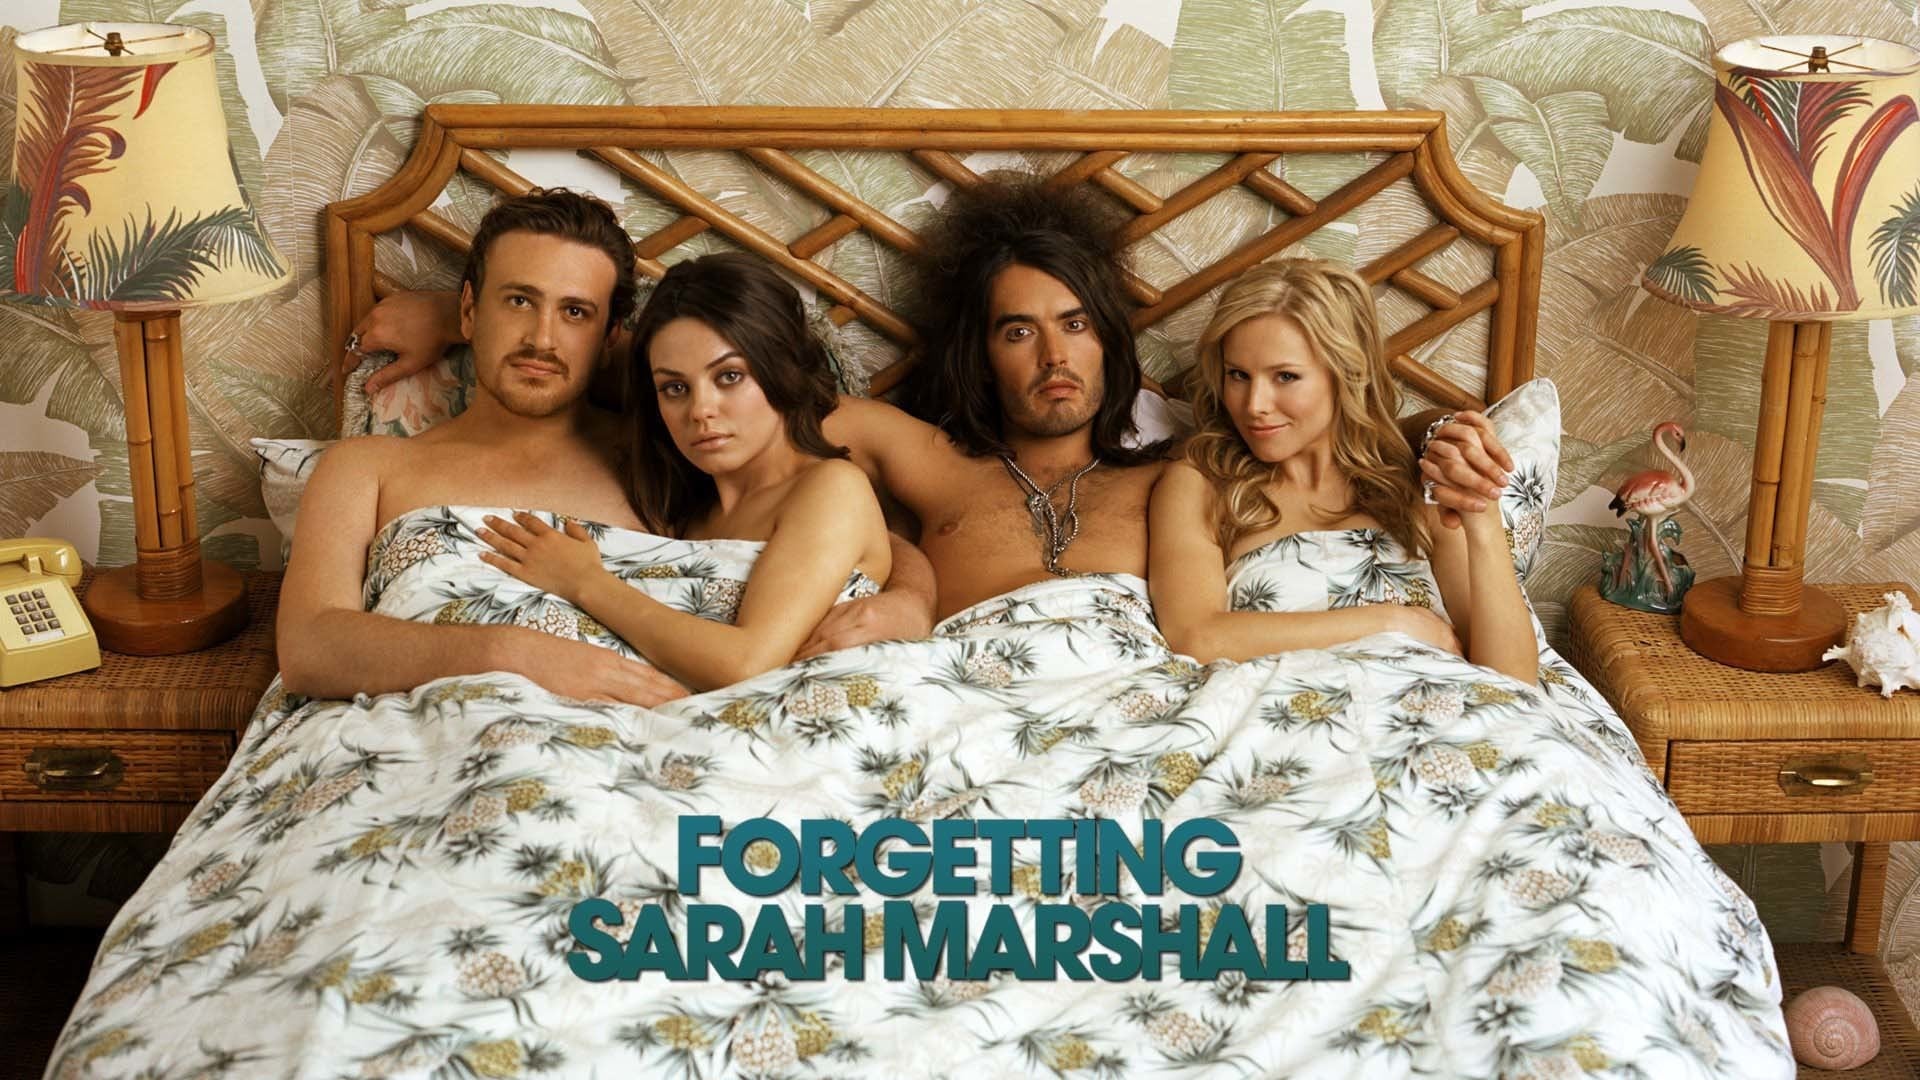 30-facts-about-the-movie-forgetting-sarah-marshall